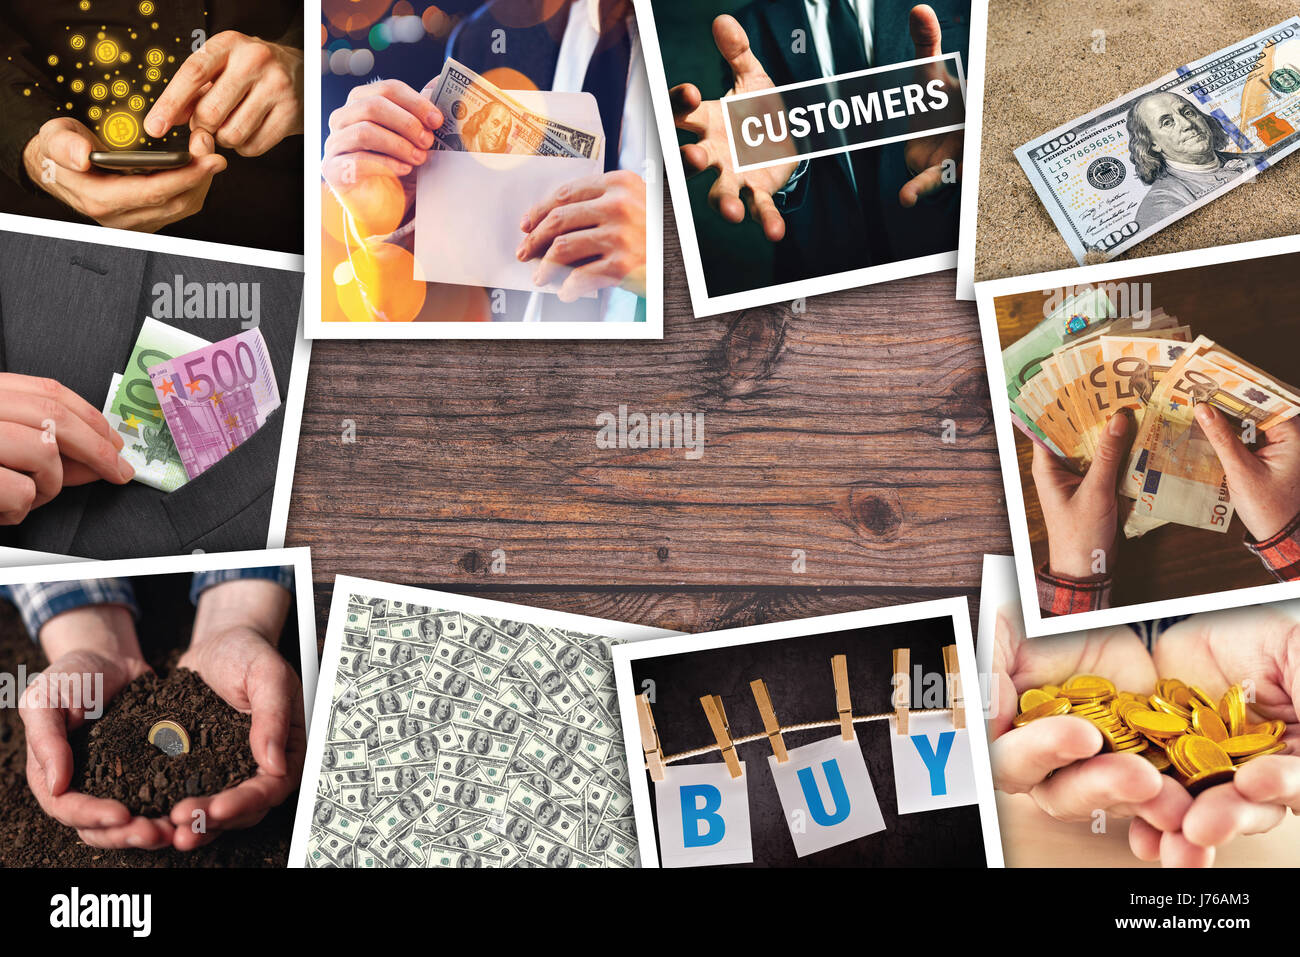 Business and entrepreneurship photo collage over wooden office desk background Stock Photo